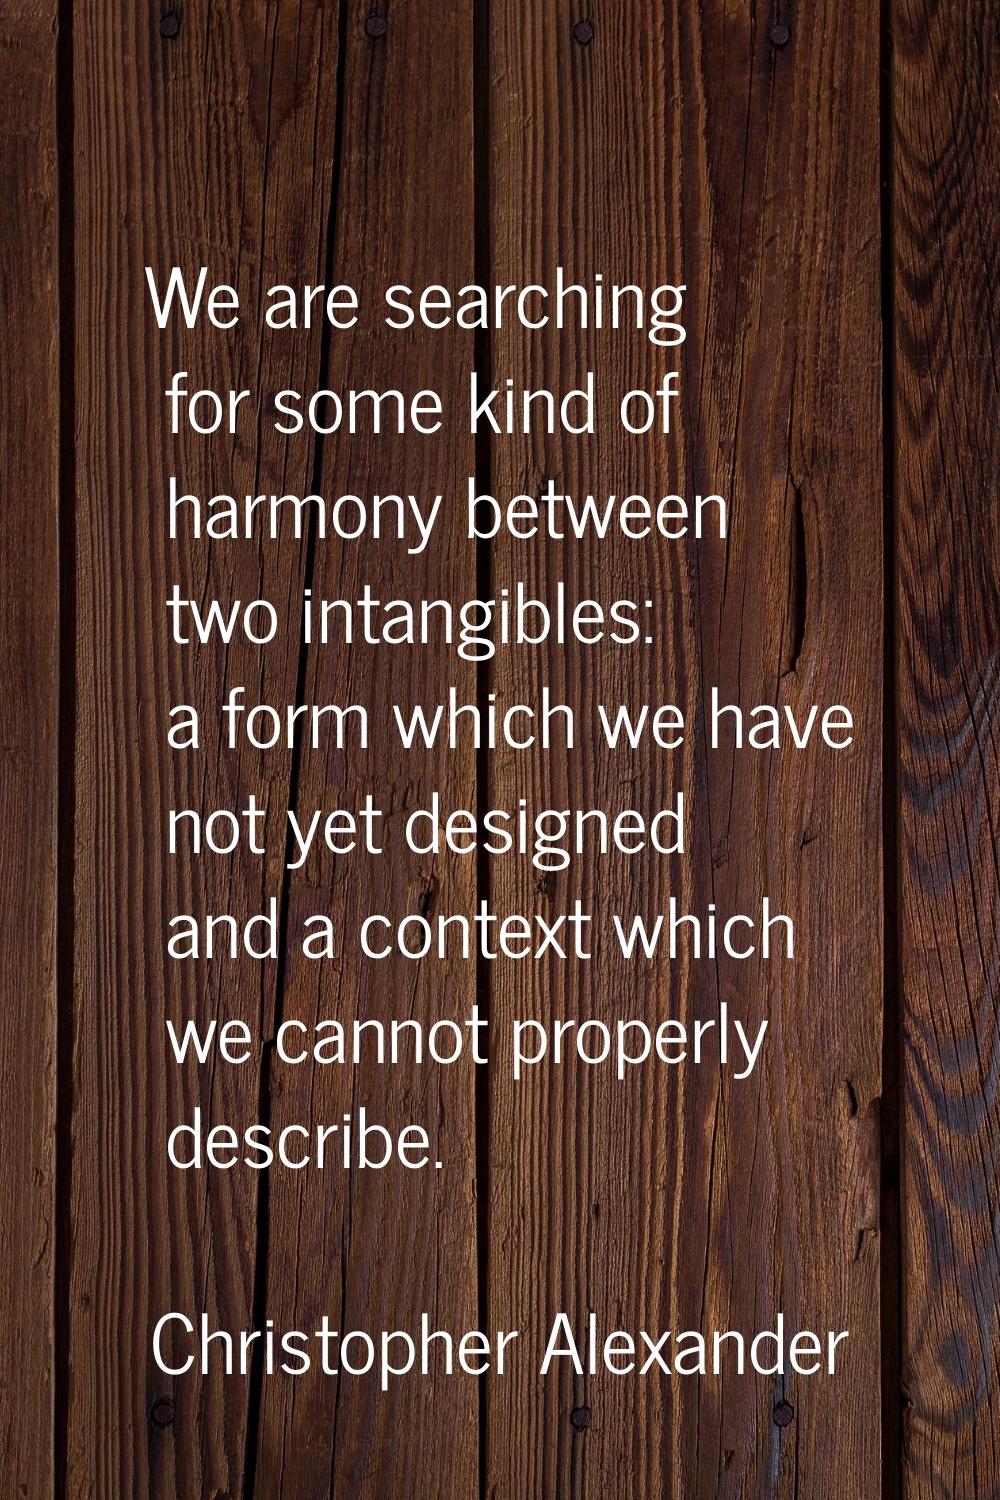 We are searching for some kind of harmony between two intangibles: a form which we have not yet des